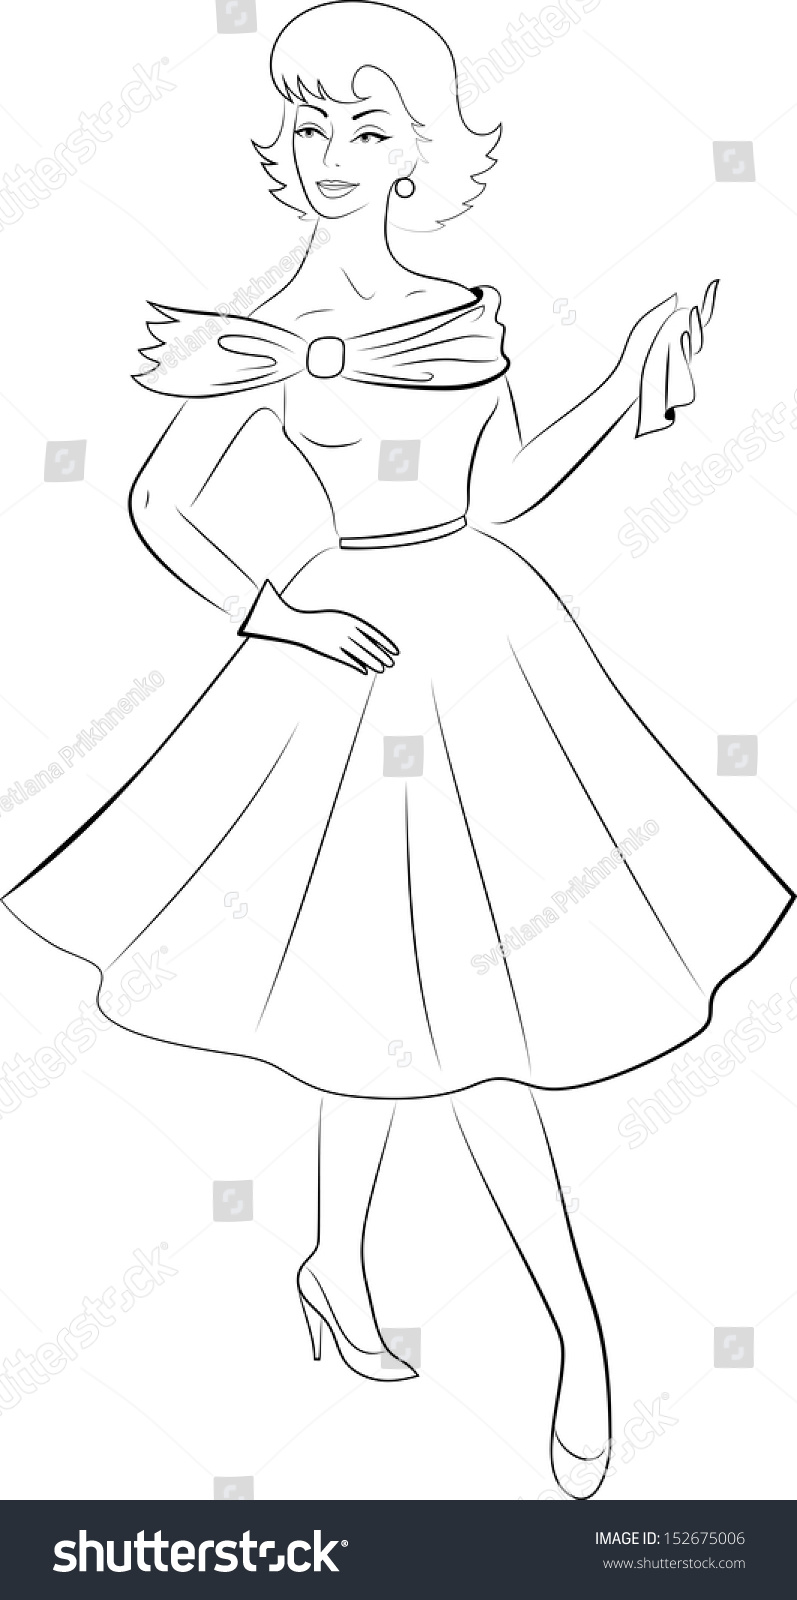 Outline Sketch Of Woman In Dress Of 50s Stock Vector Illustration ...